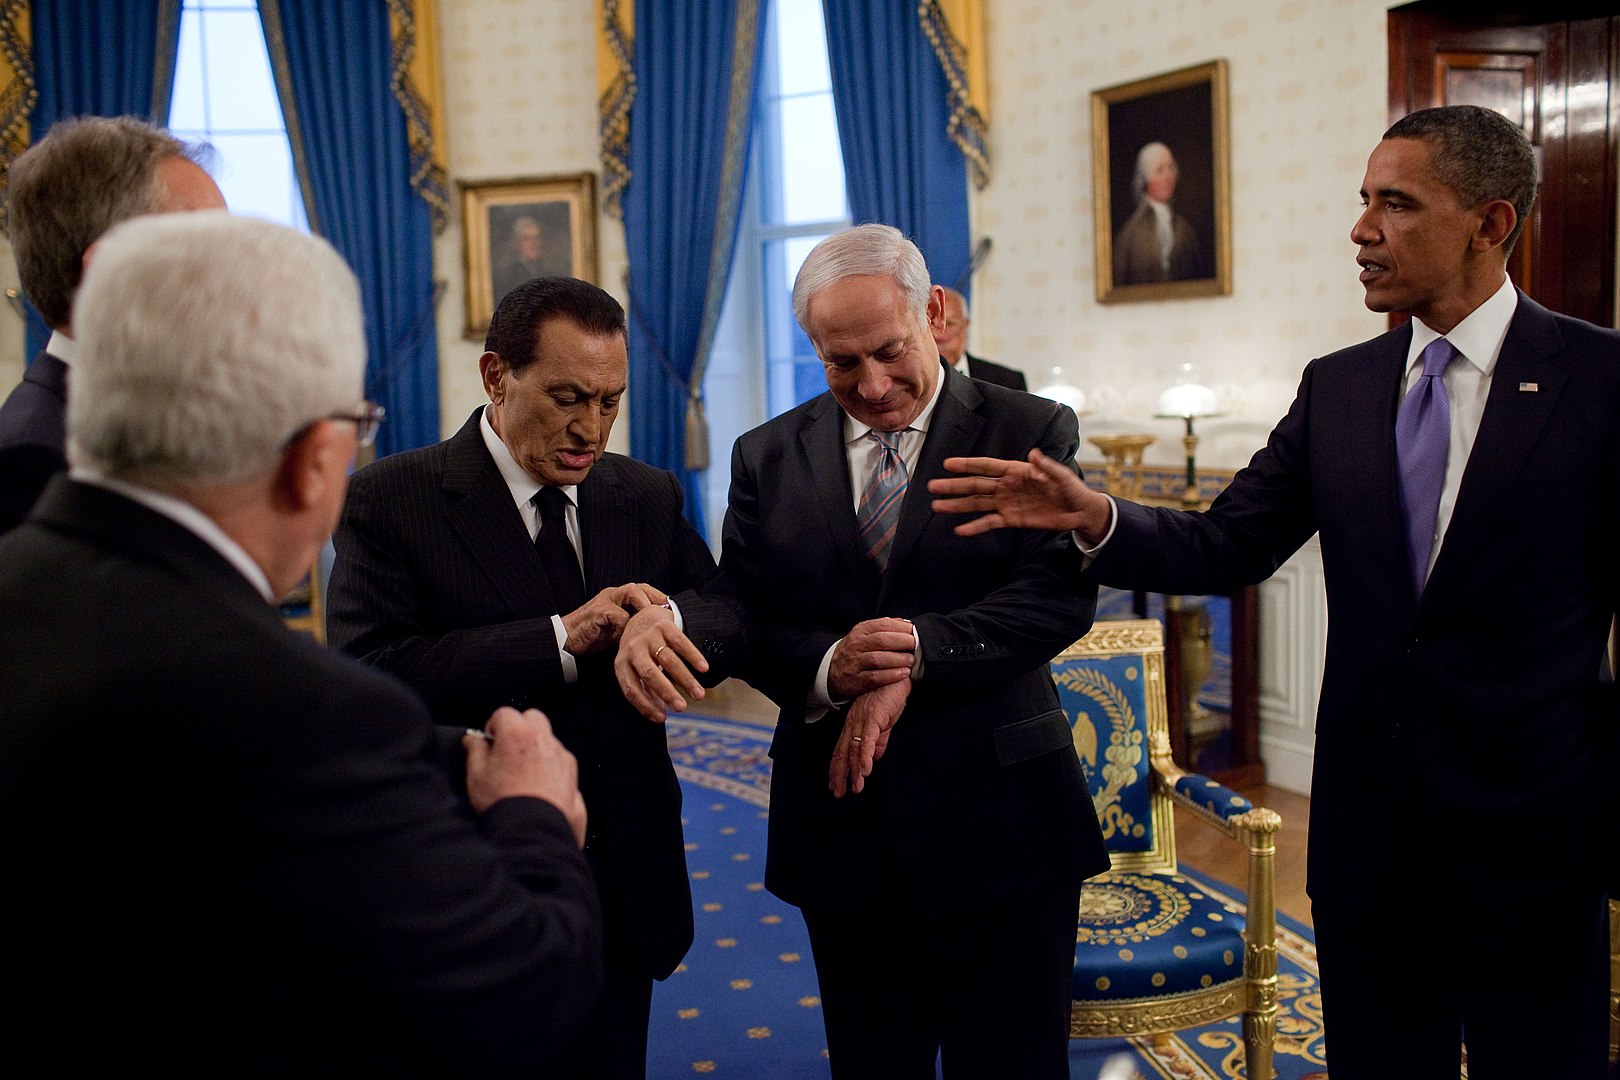 Mubarak, Netanyahu and President Obama at the White House in 2010 during Middle East negotiations. Photo: The White House